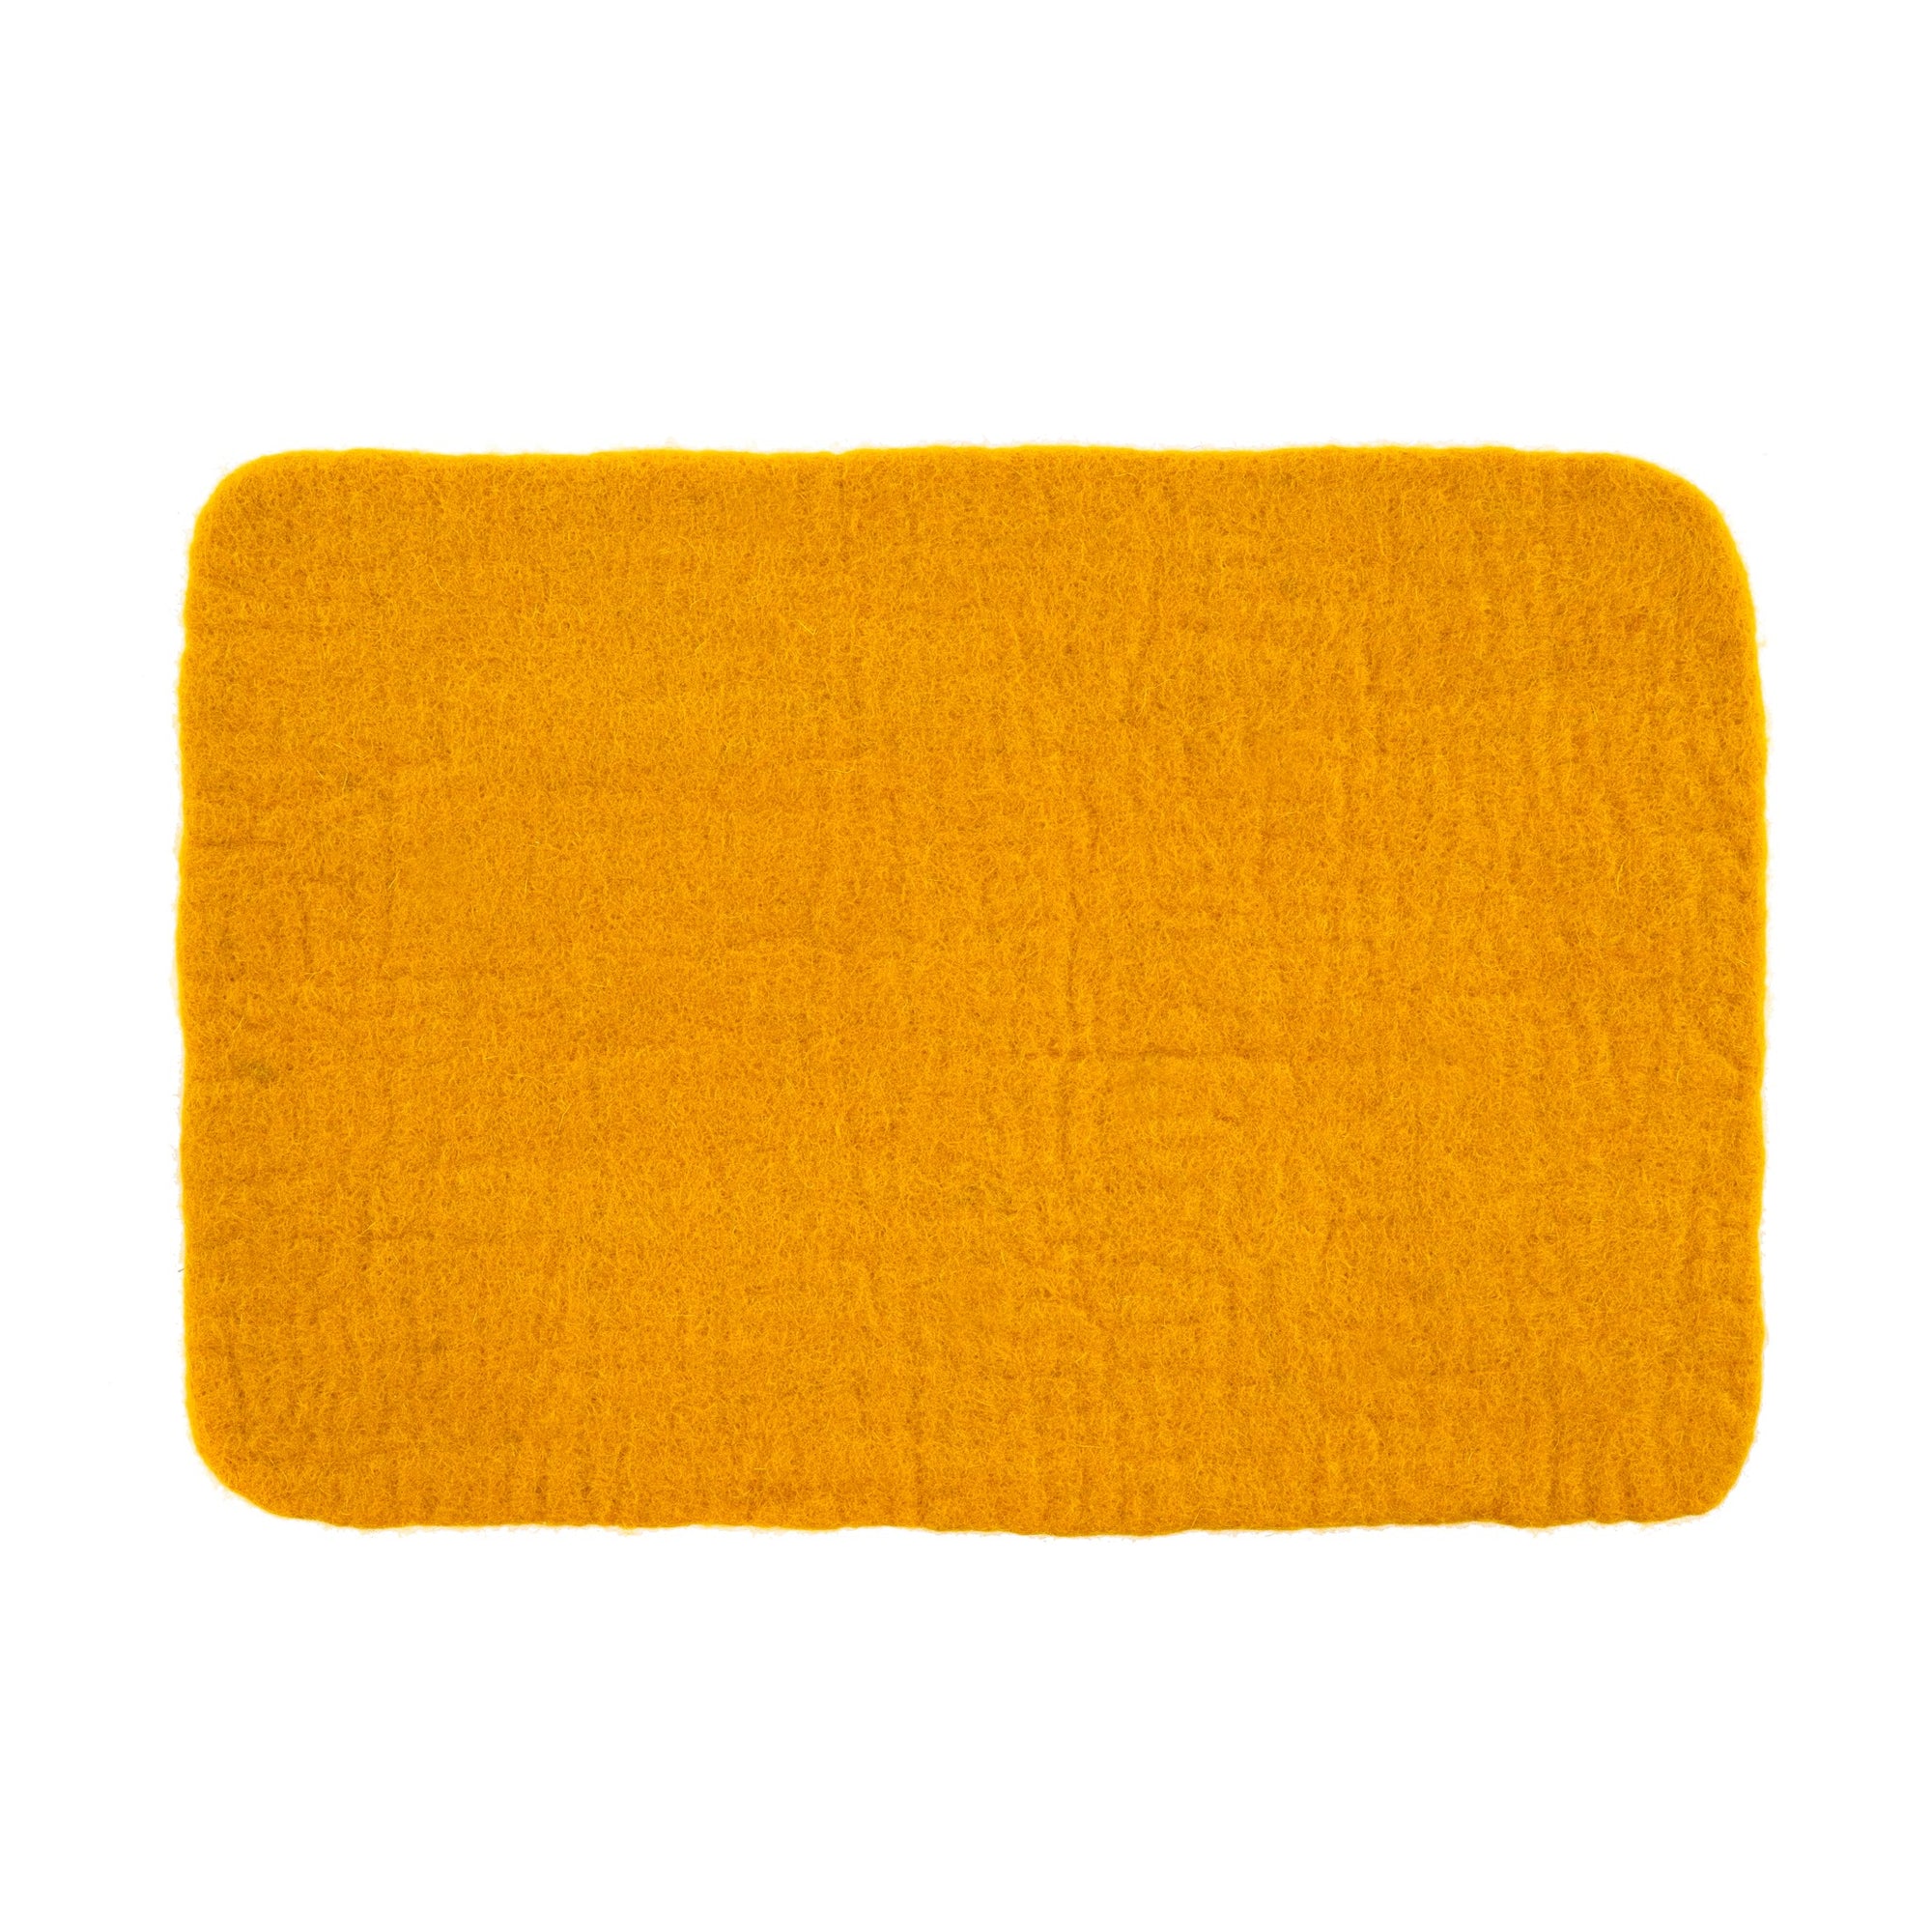 Nepalese Felt Rectangle Placemat - Yellow